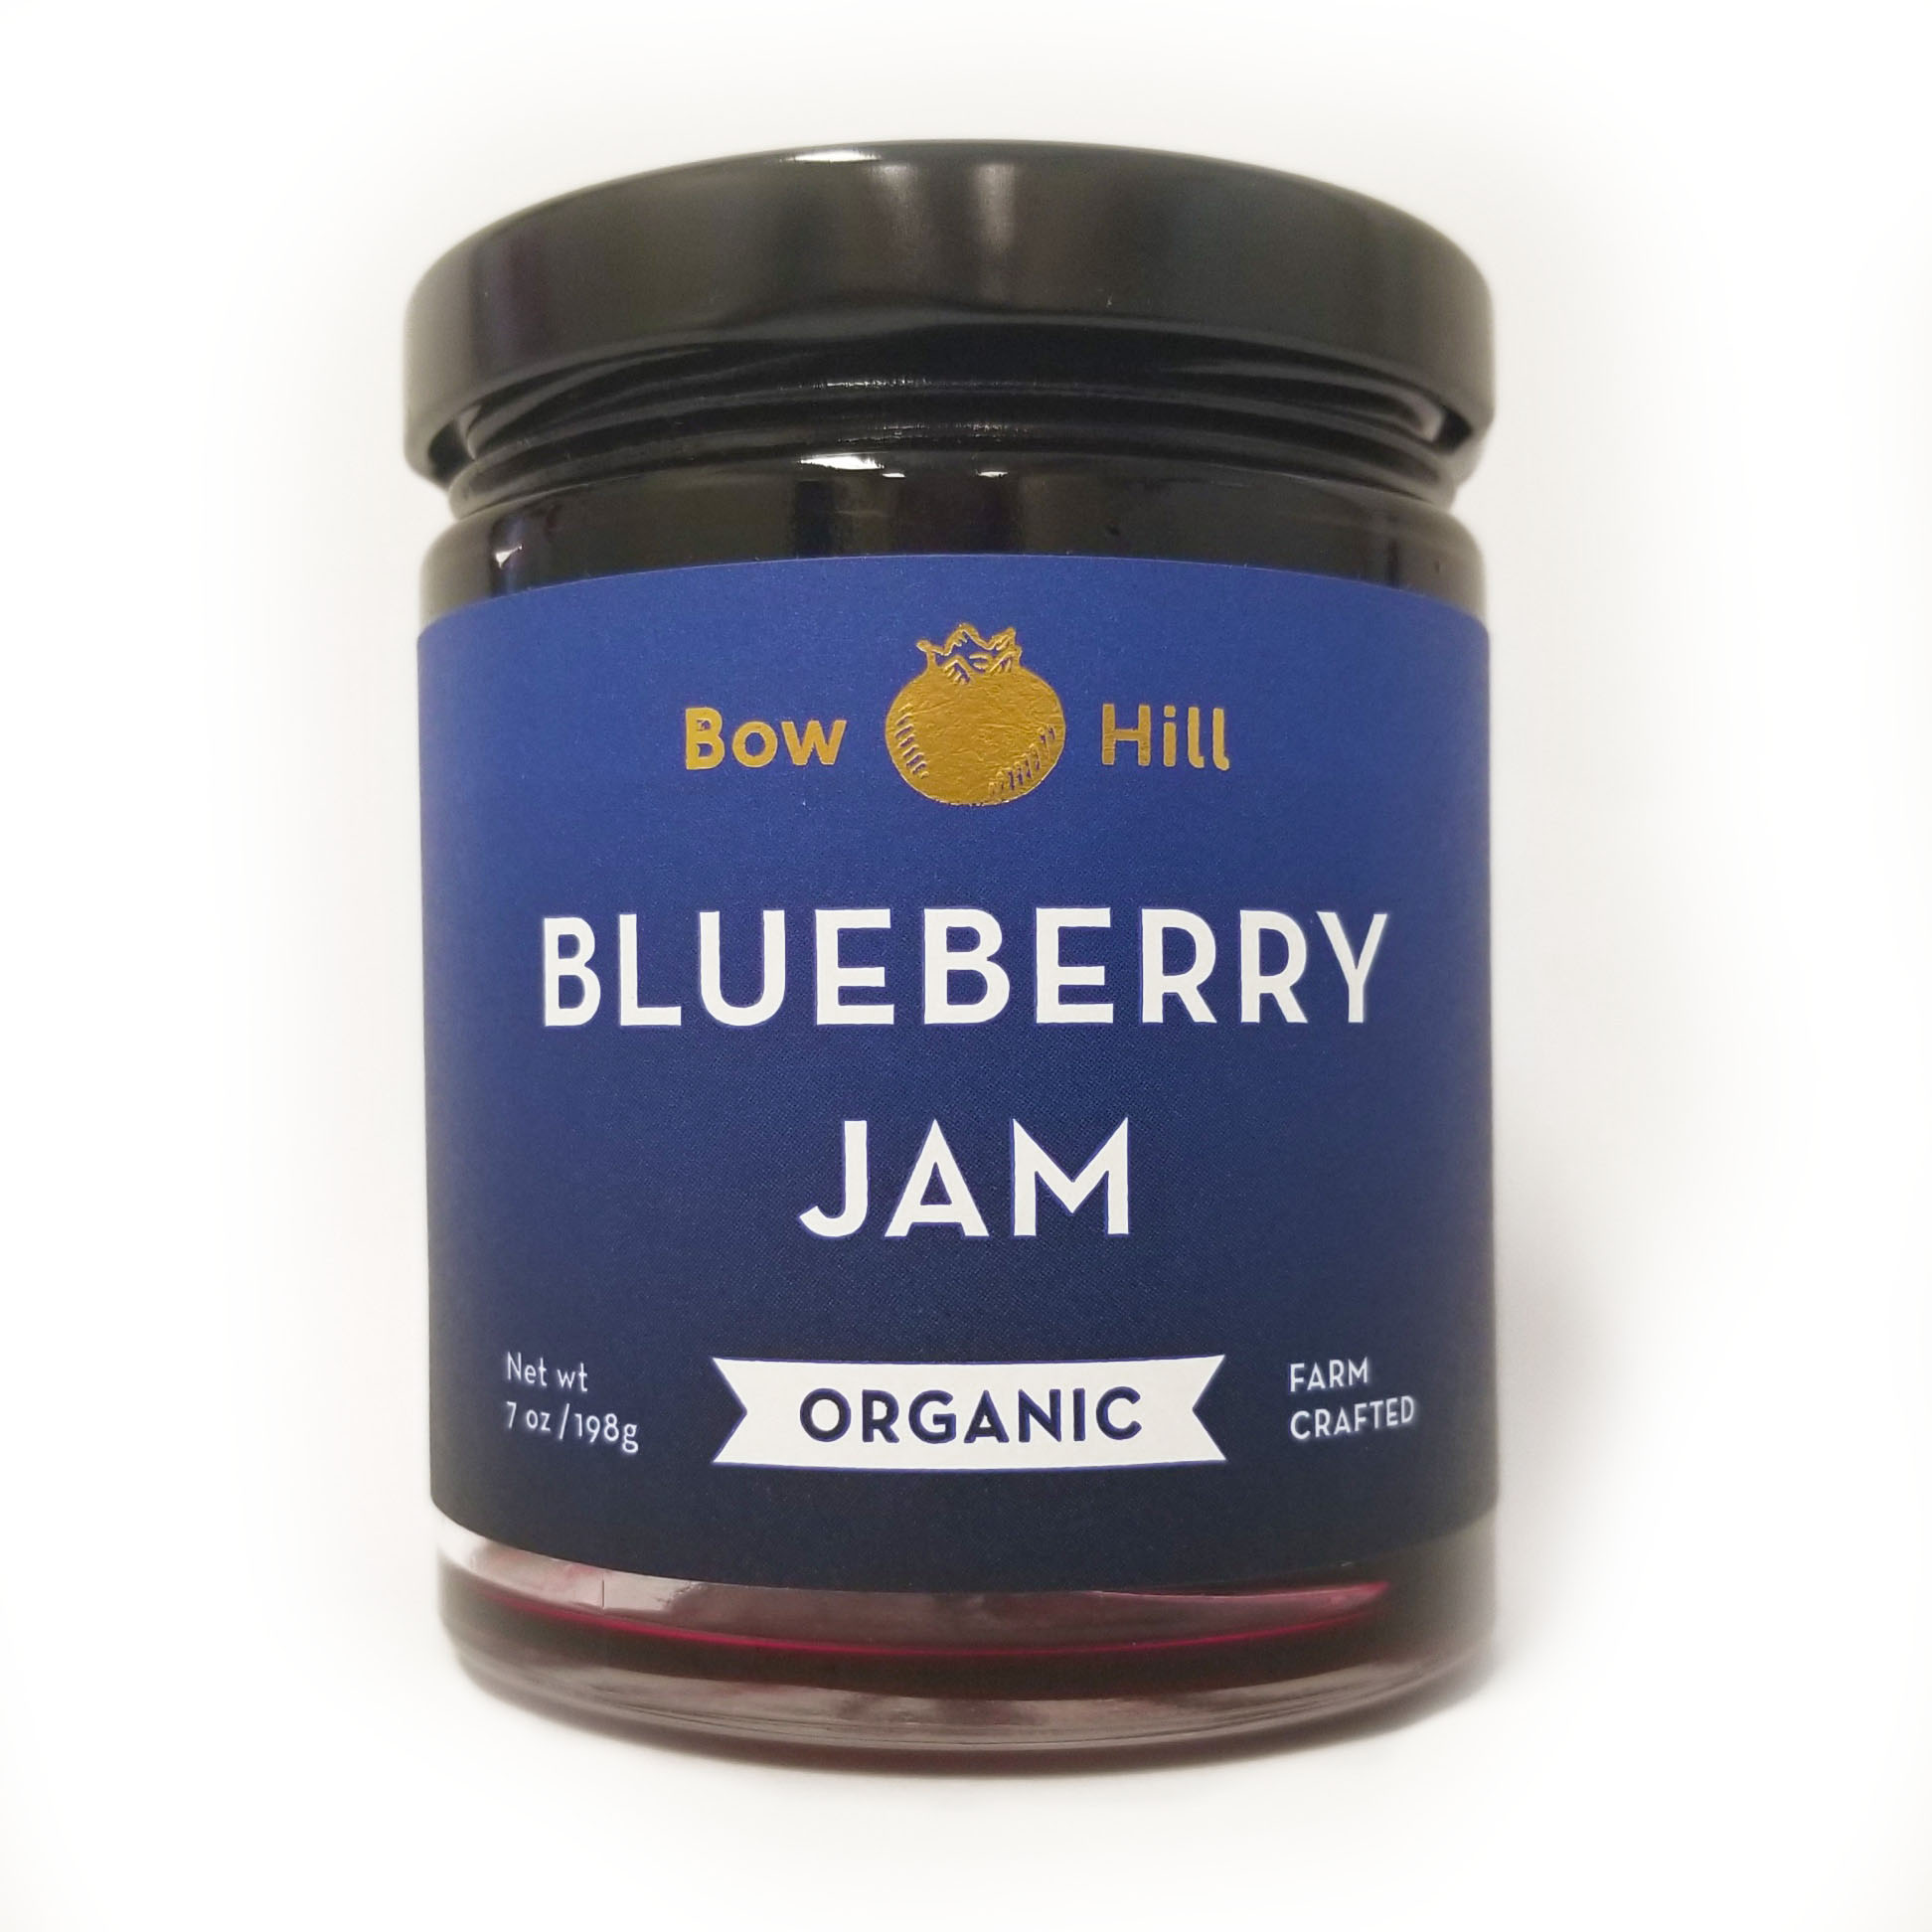 Bow Hill Blueberry Jam